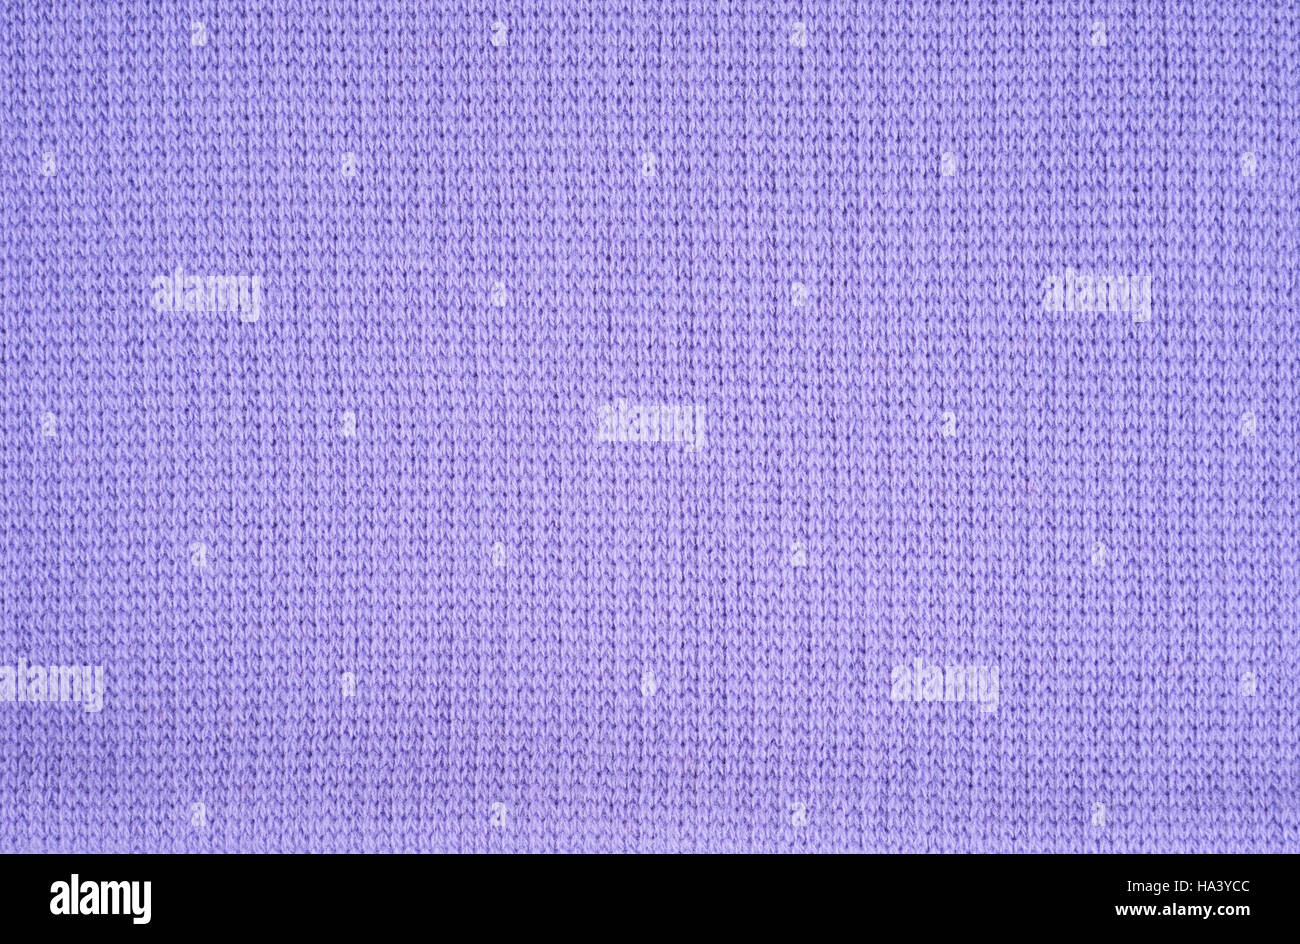 Violet knitted fabric as a seamless background Stock Photo